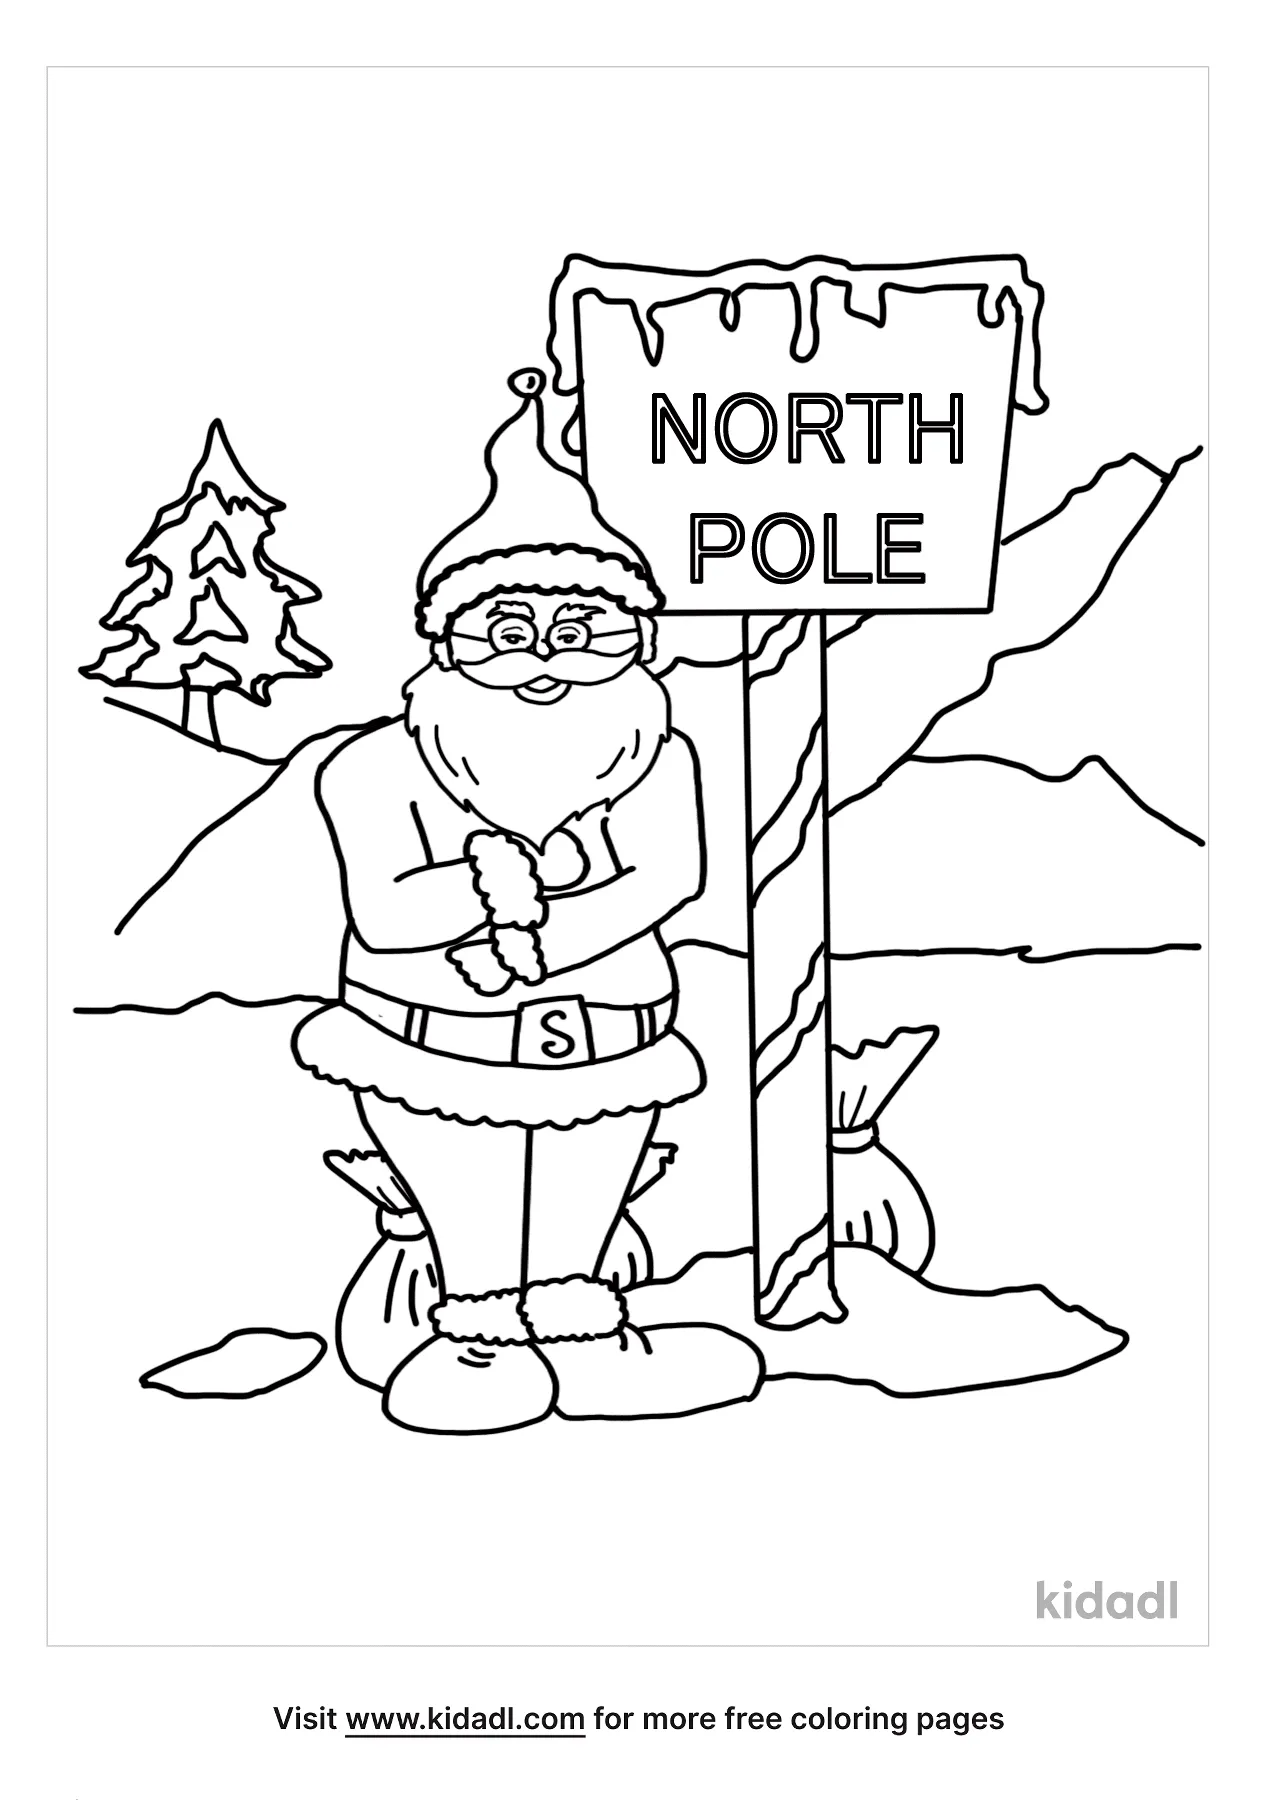 Free north pole coloring page coloring page printables